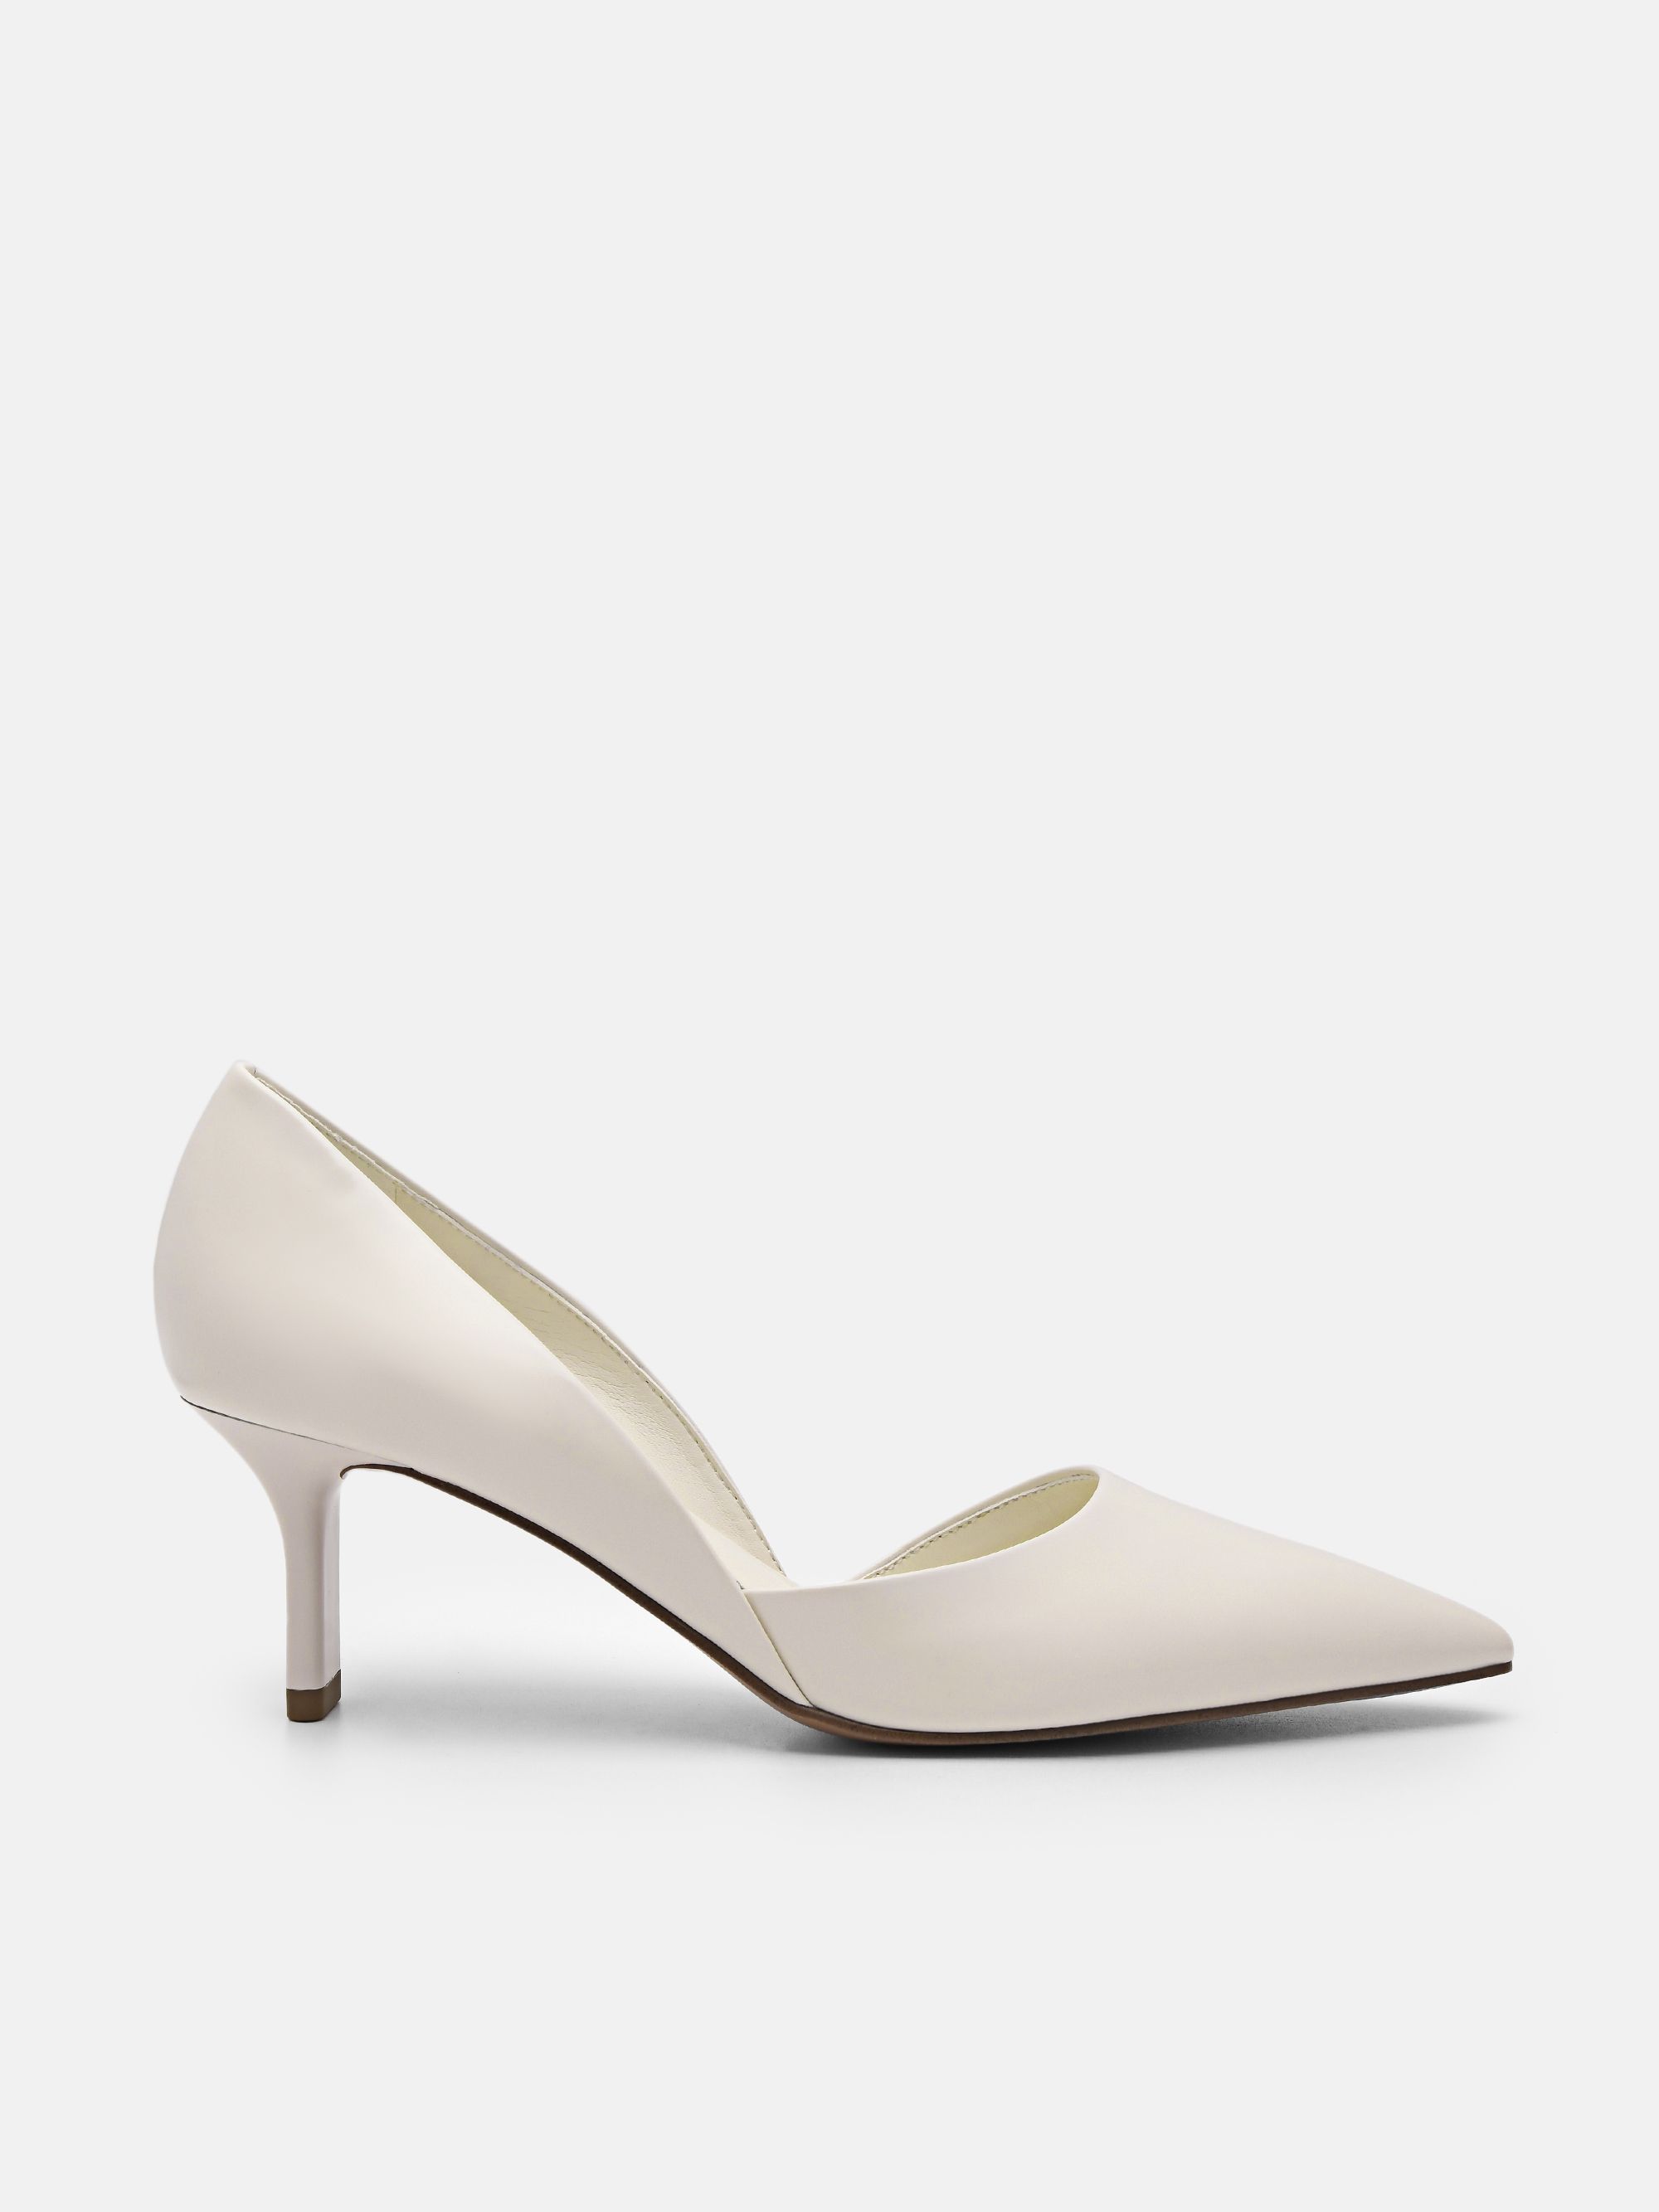 Rocco Leather Heel D'Orsay Pumps
-
Chalk | Pedro Shoes